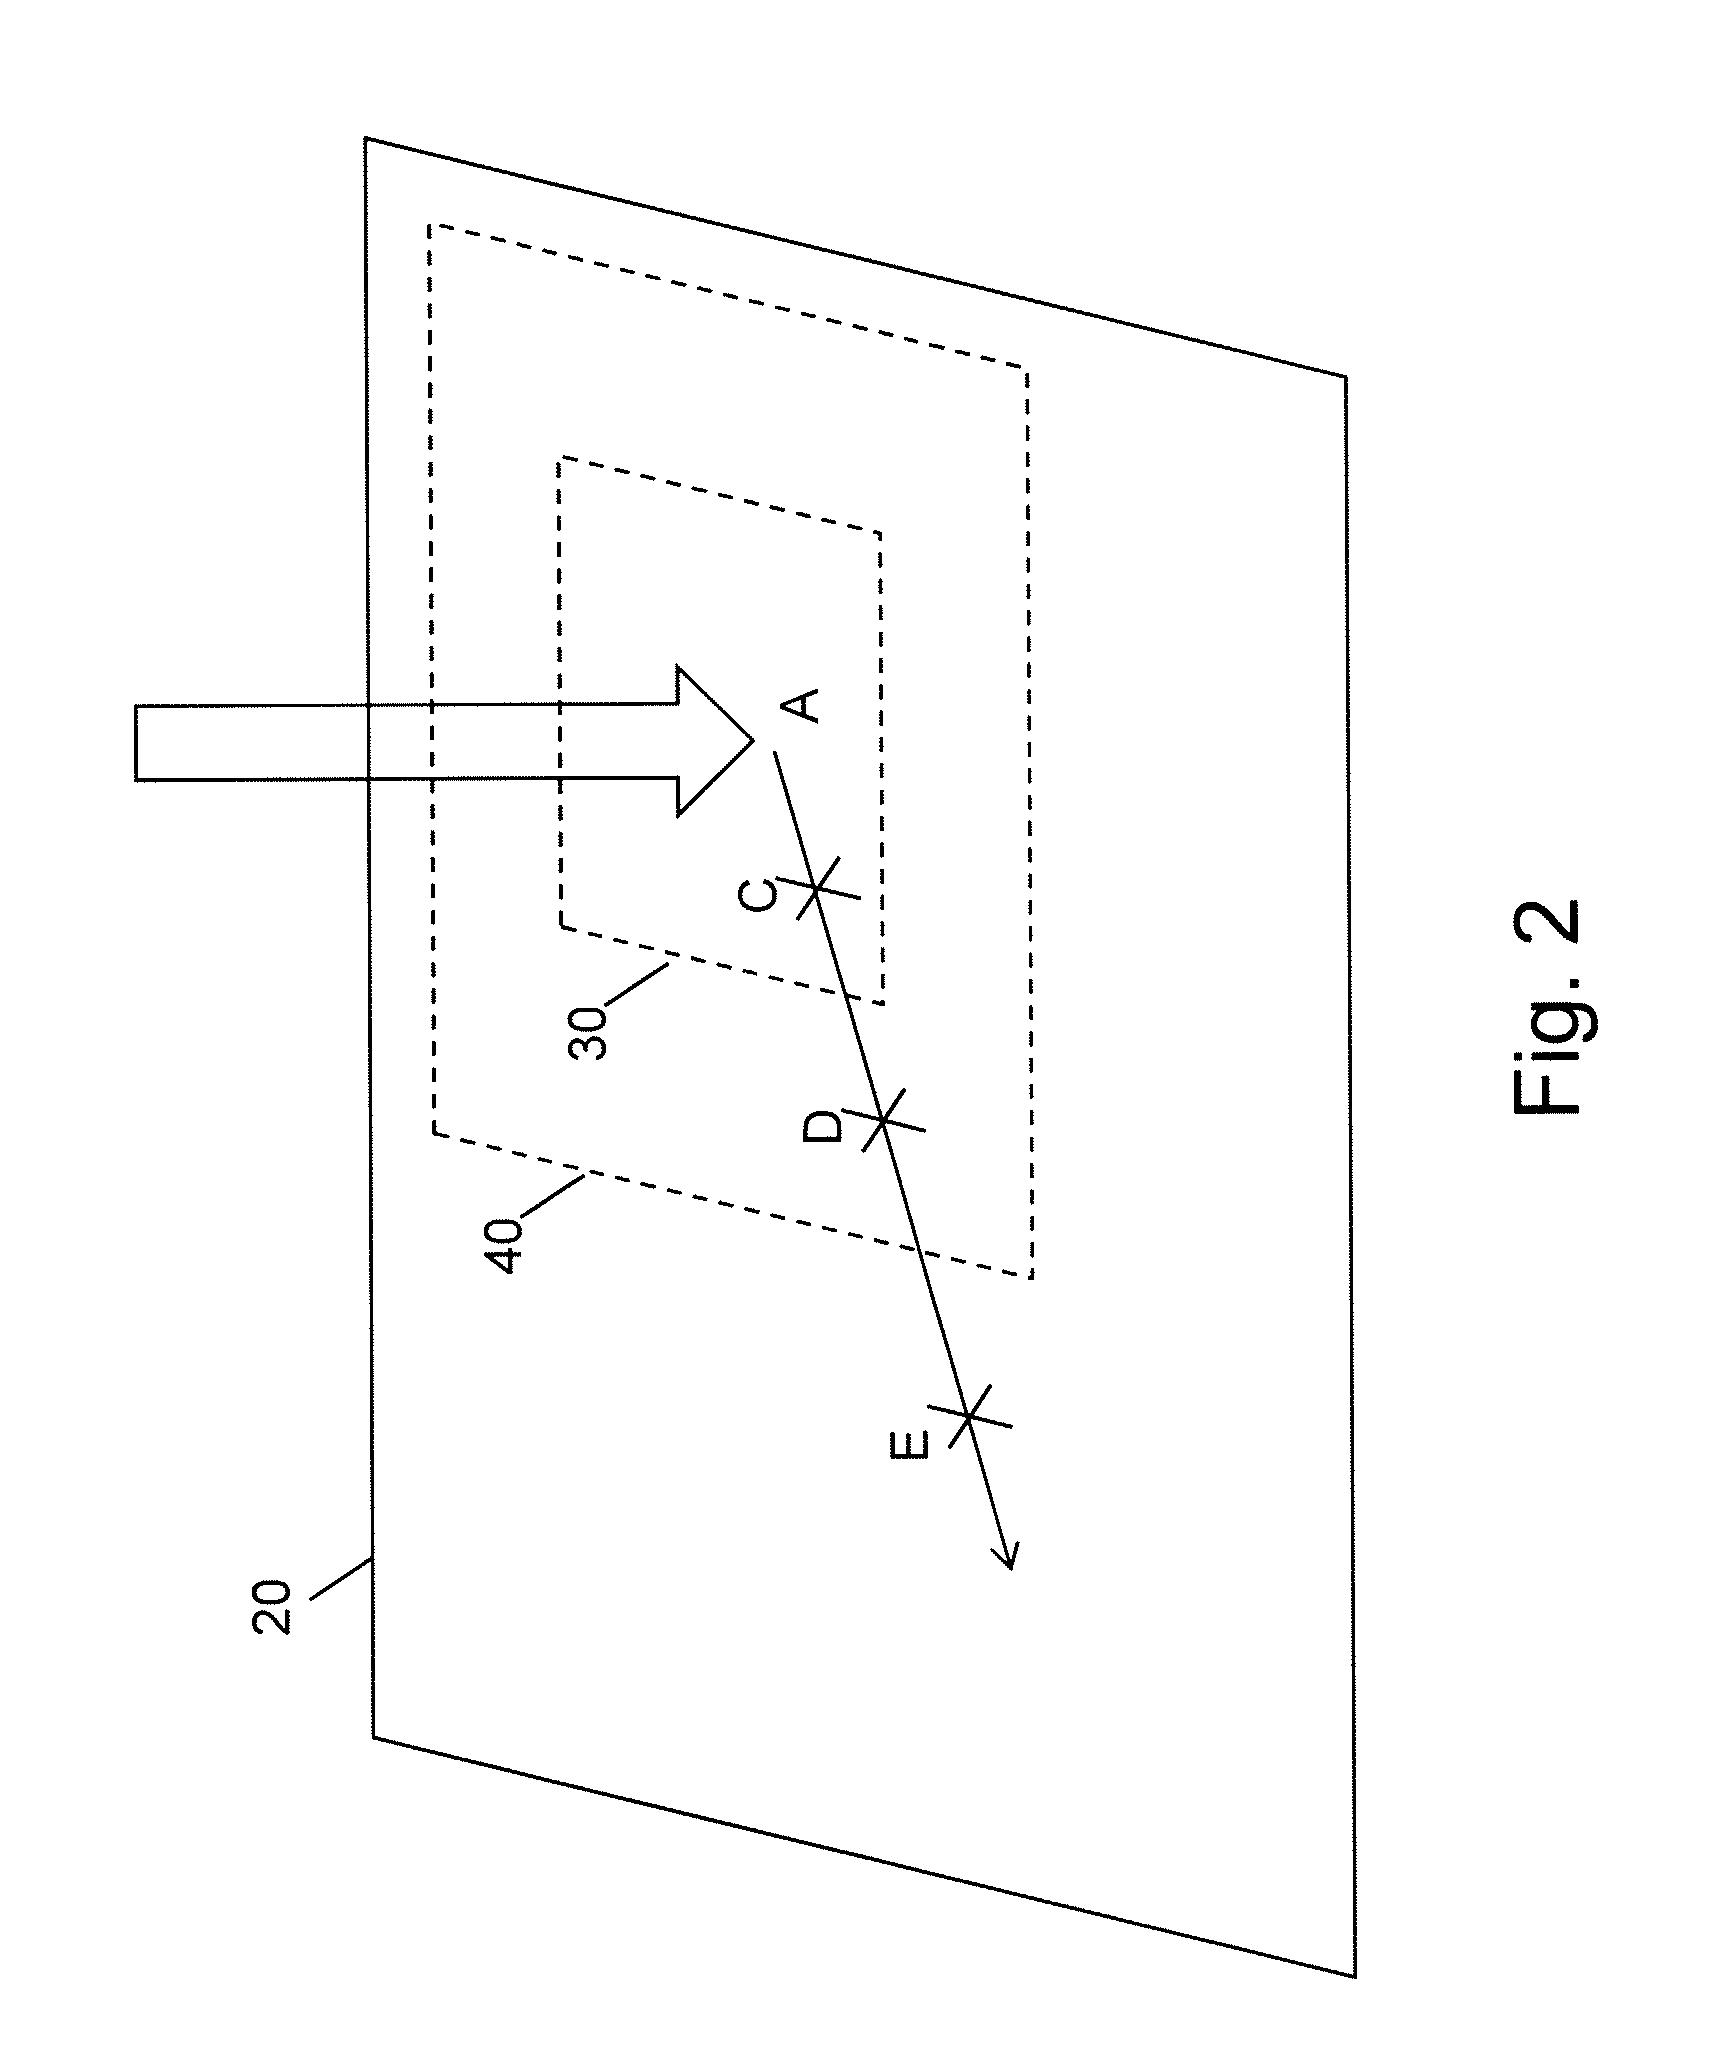 Method for Determining Touch Point Displacement and Associated Apparatus